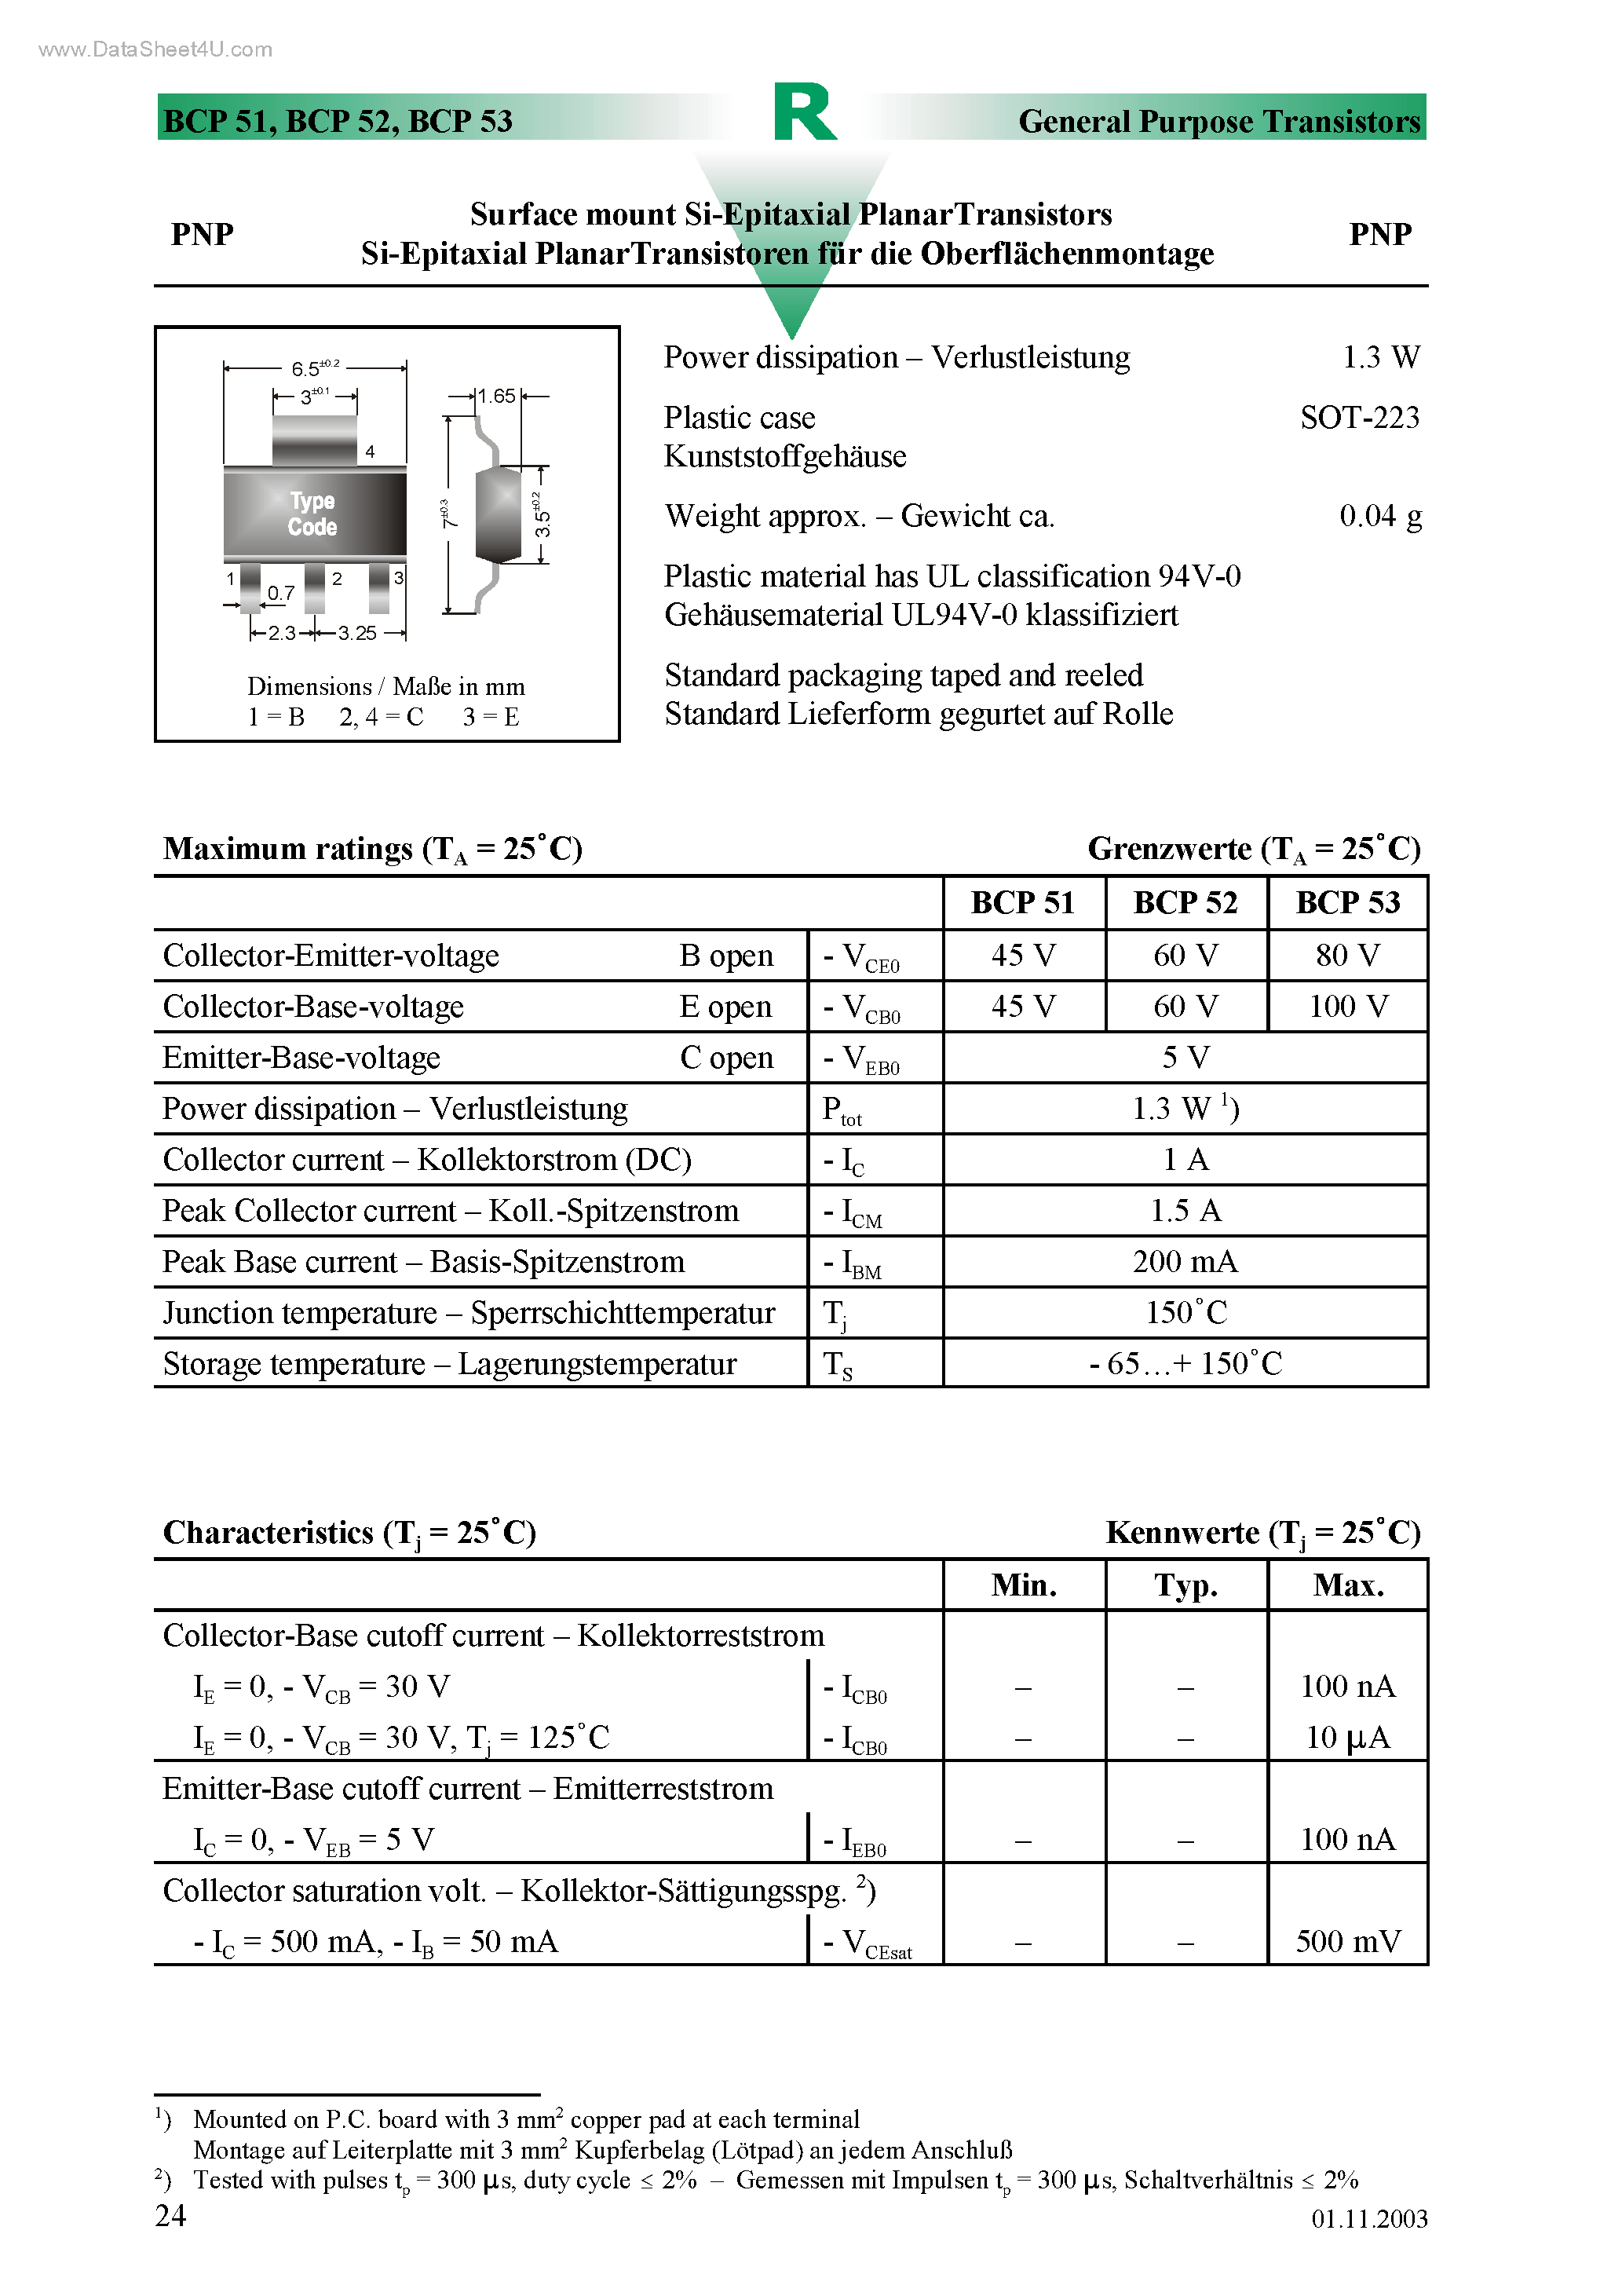 Datasheet BCP52 - Surface mount Si-Epitaxial PlanarTransistors page 1